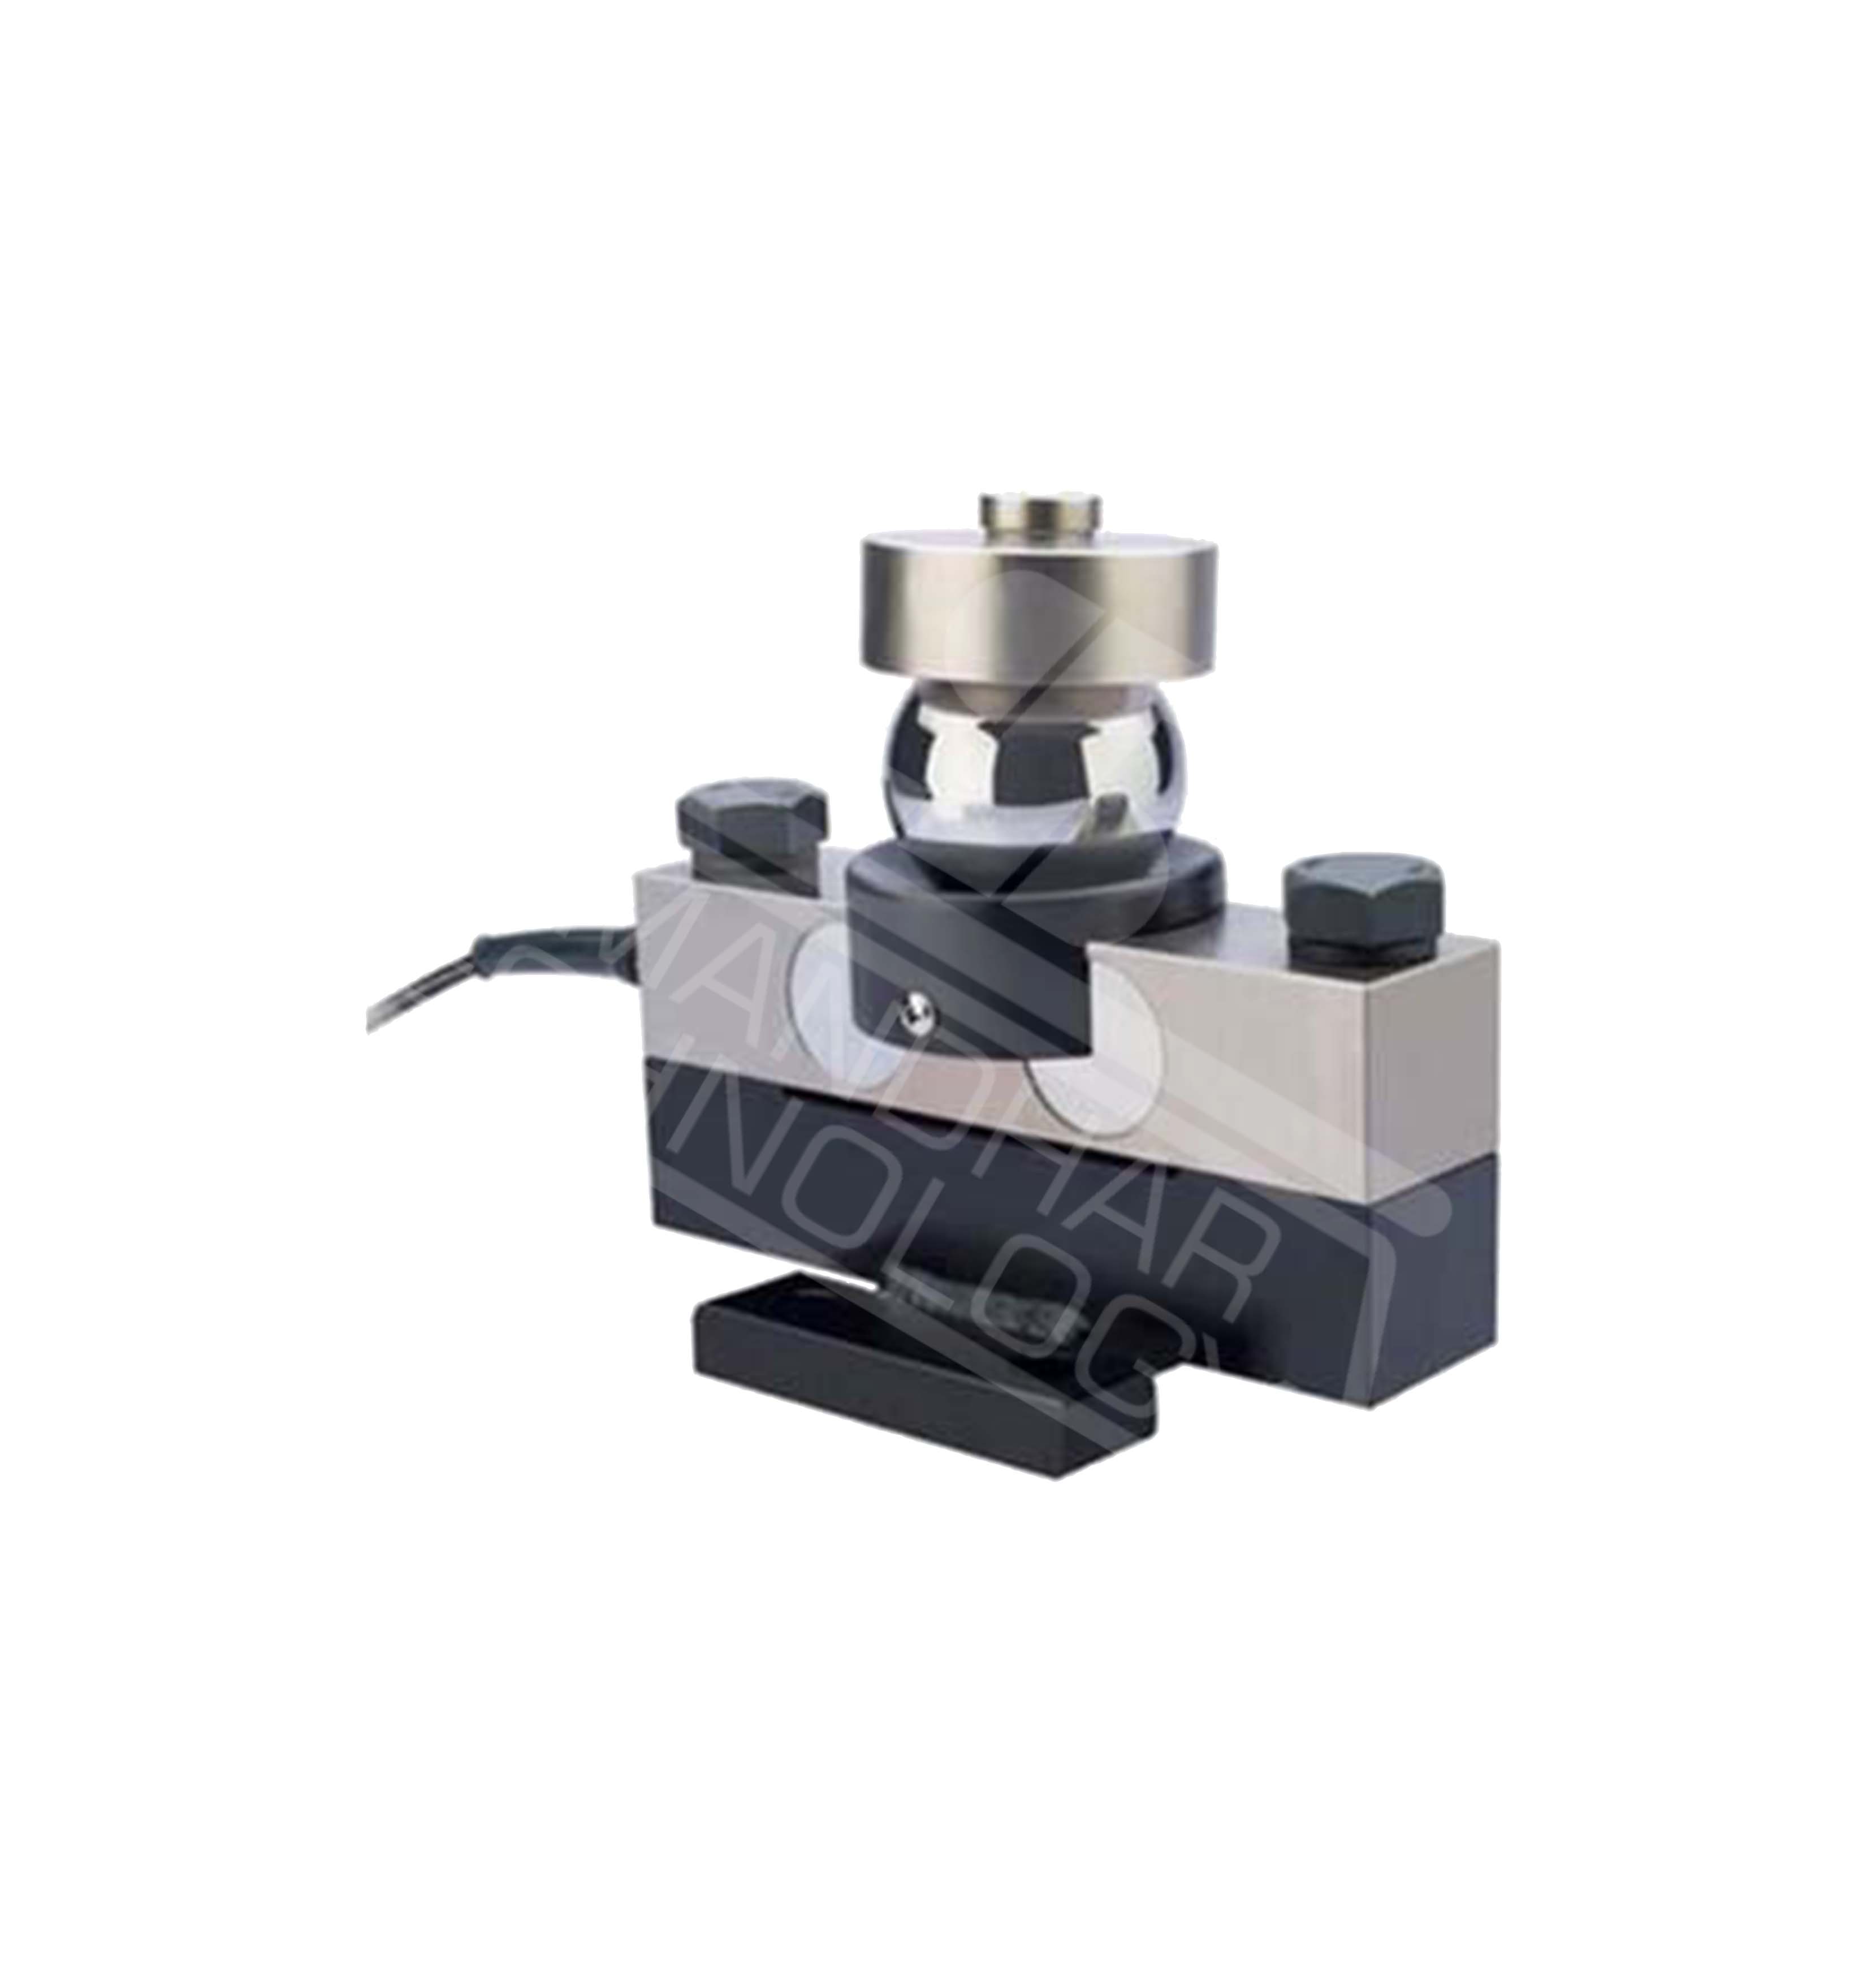 Kely Digital Weighbridge Cup Ball Load Cell